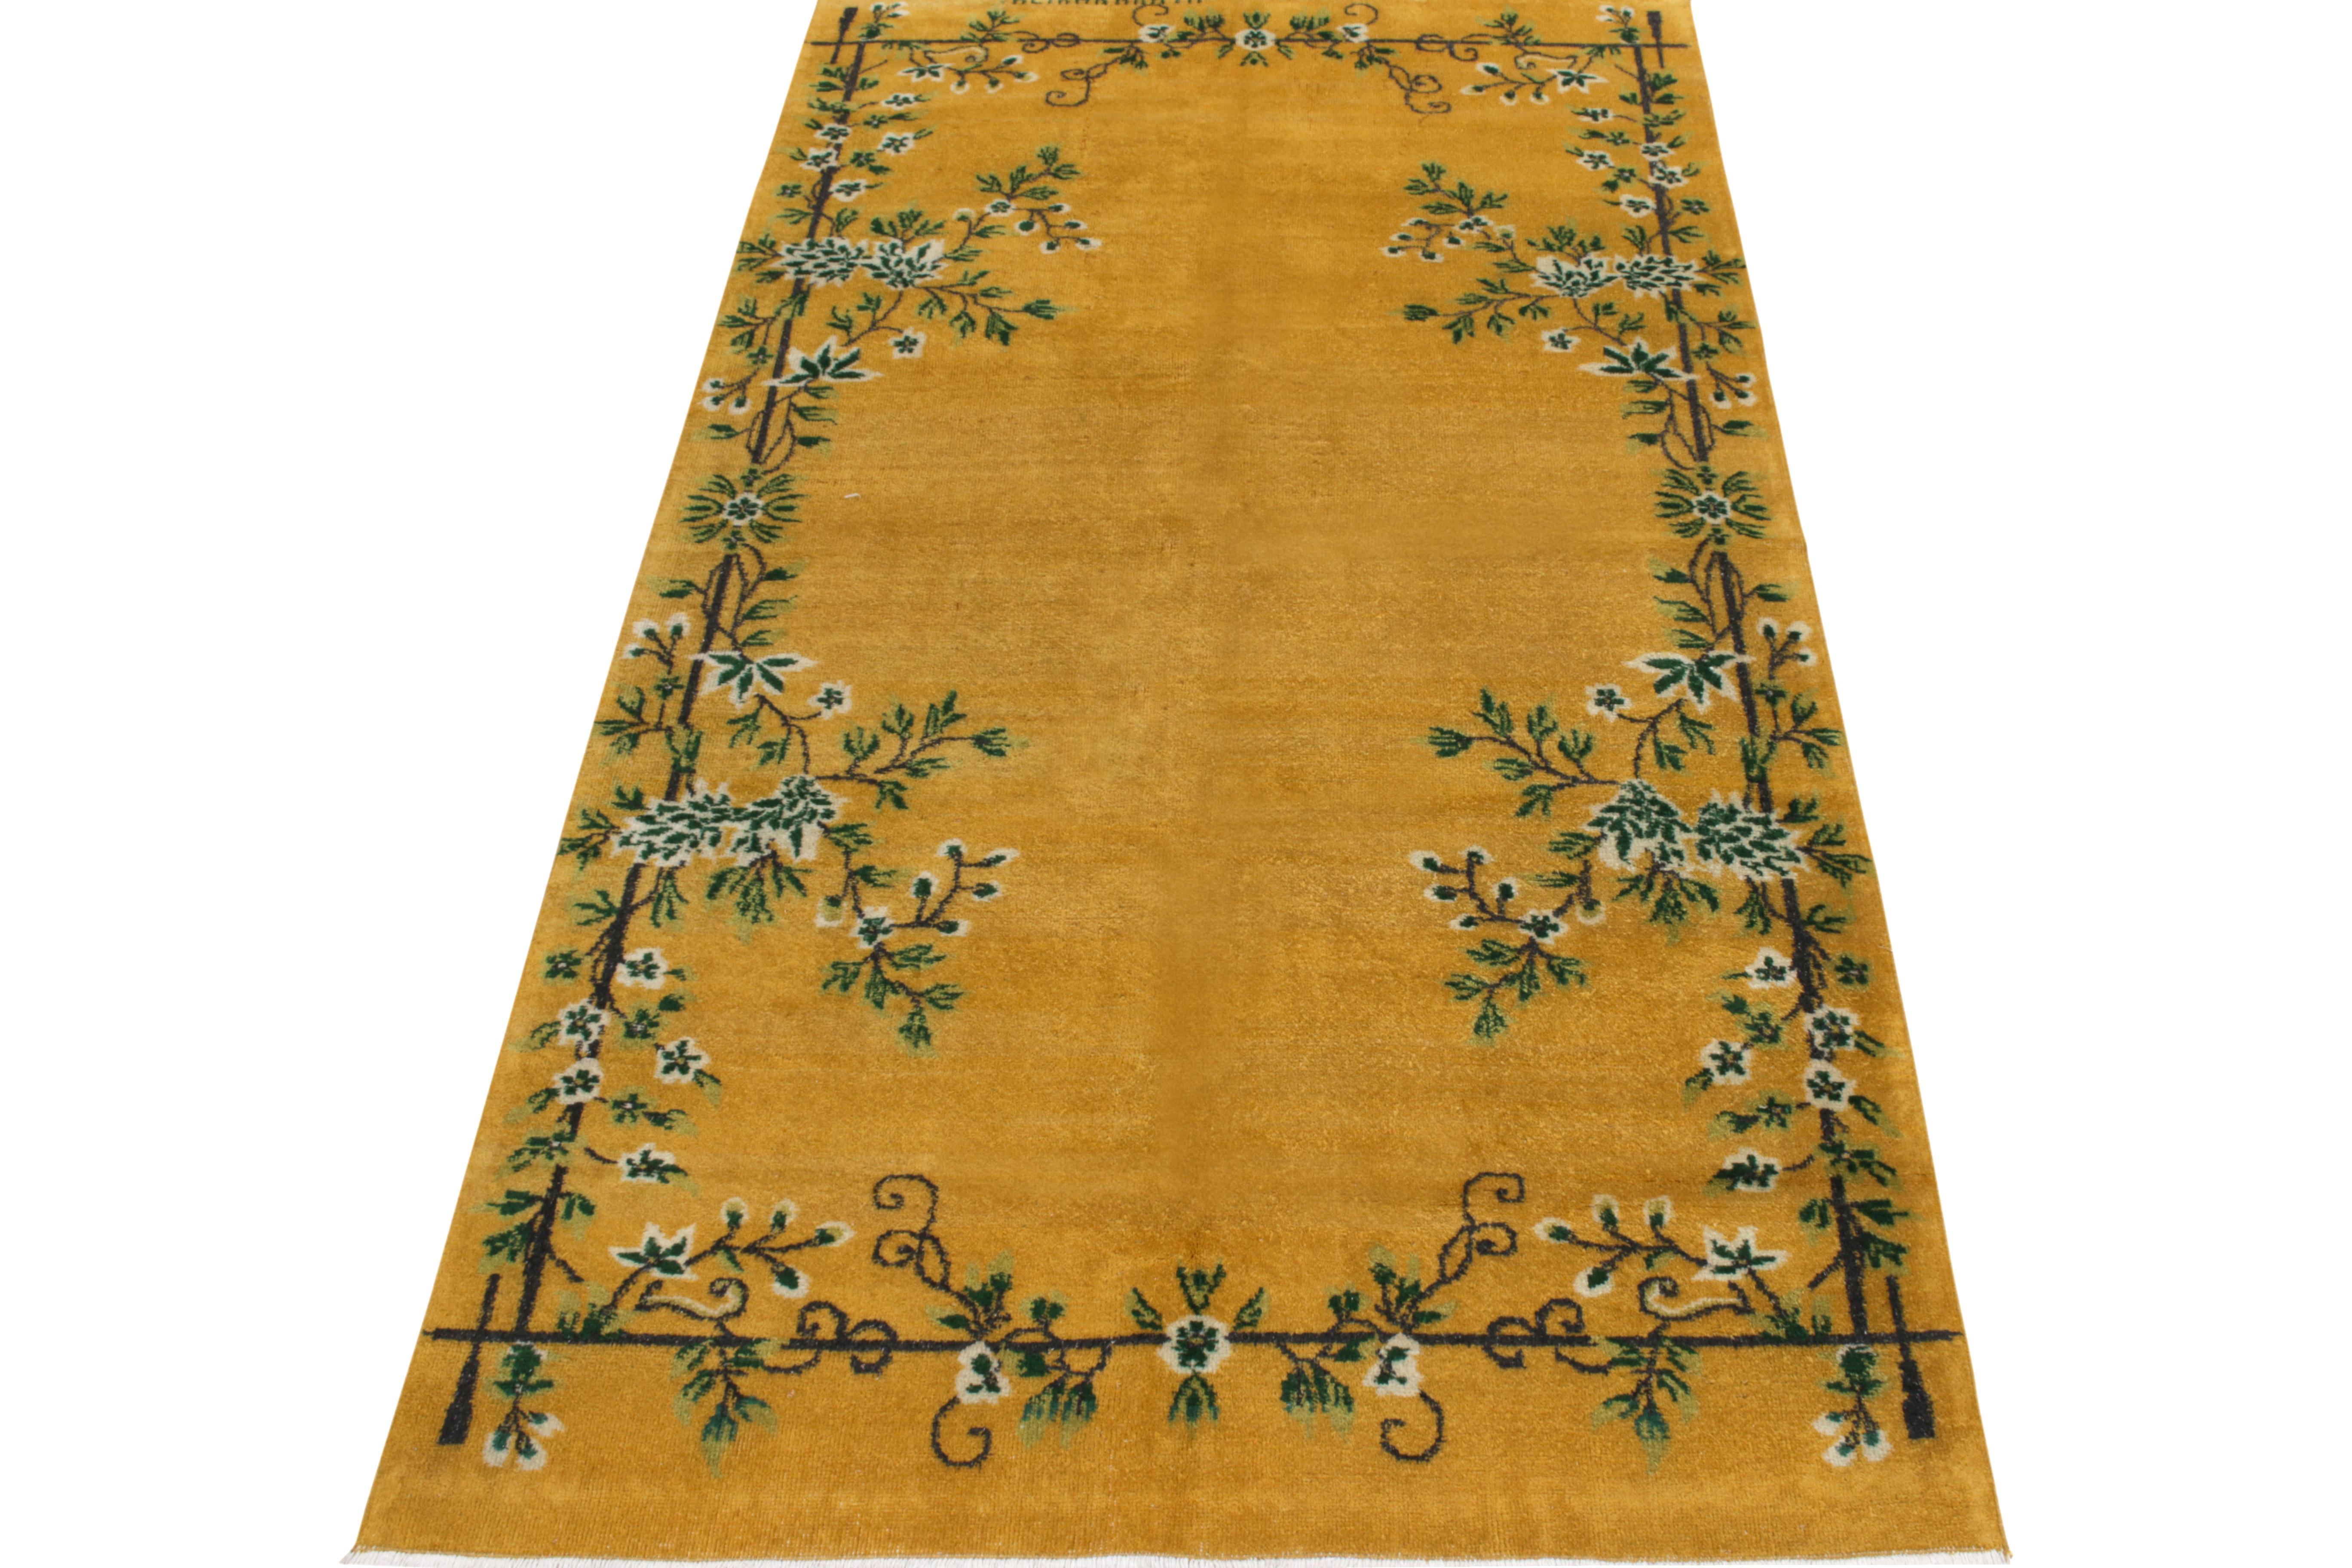 This vintage 5x9 Art Deco rug is a rare signature piece in the new additions to Rug & Kilim’s Mid-Century Pasha Collection. Hand-knotted in wool, it originates circa 1960-1970 and is believed to hail from works by Turkish artist Zeki Müren. 

This